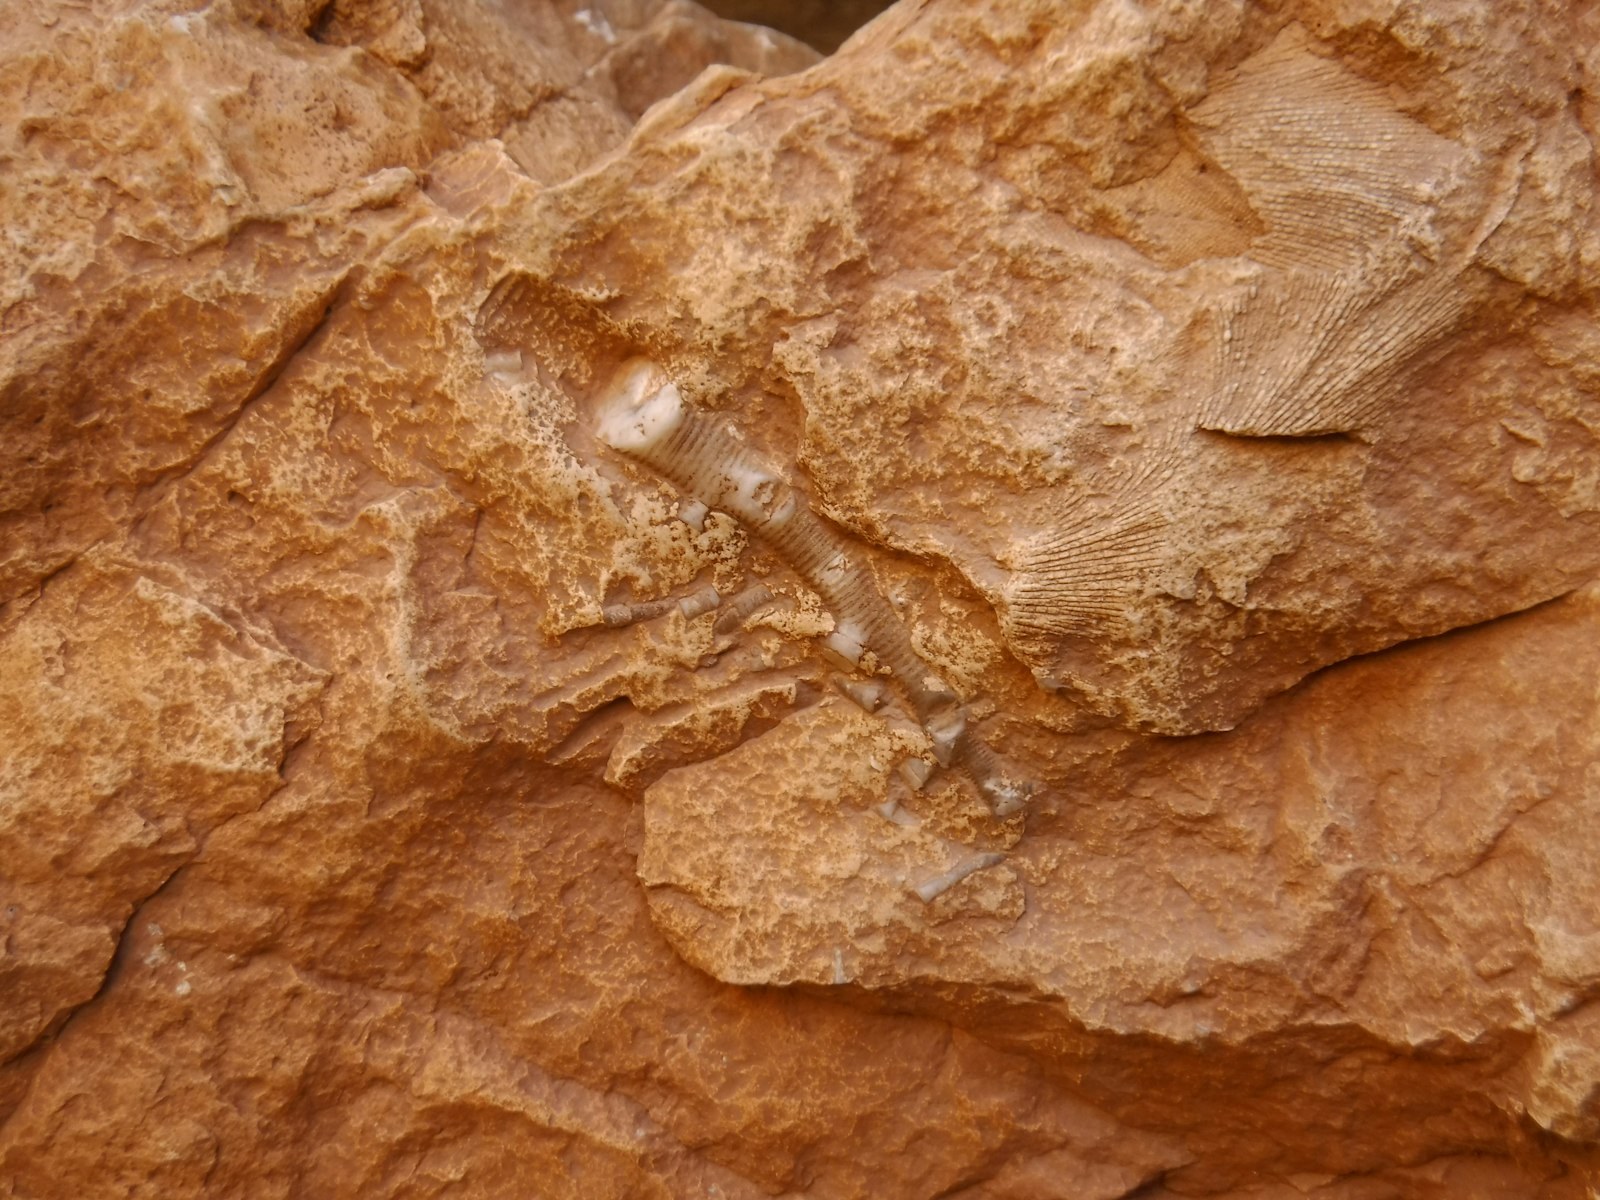 Fossil on jagged rock face